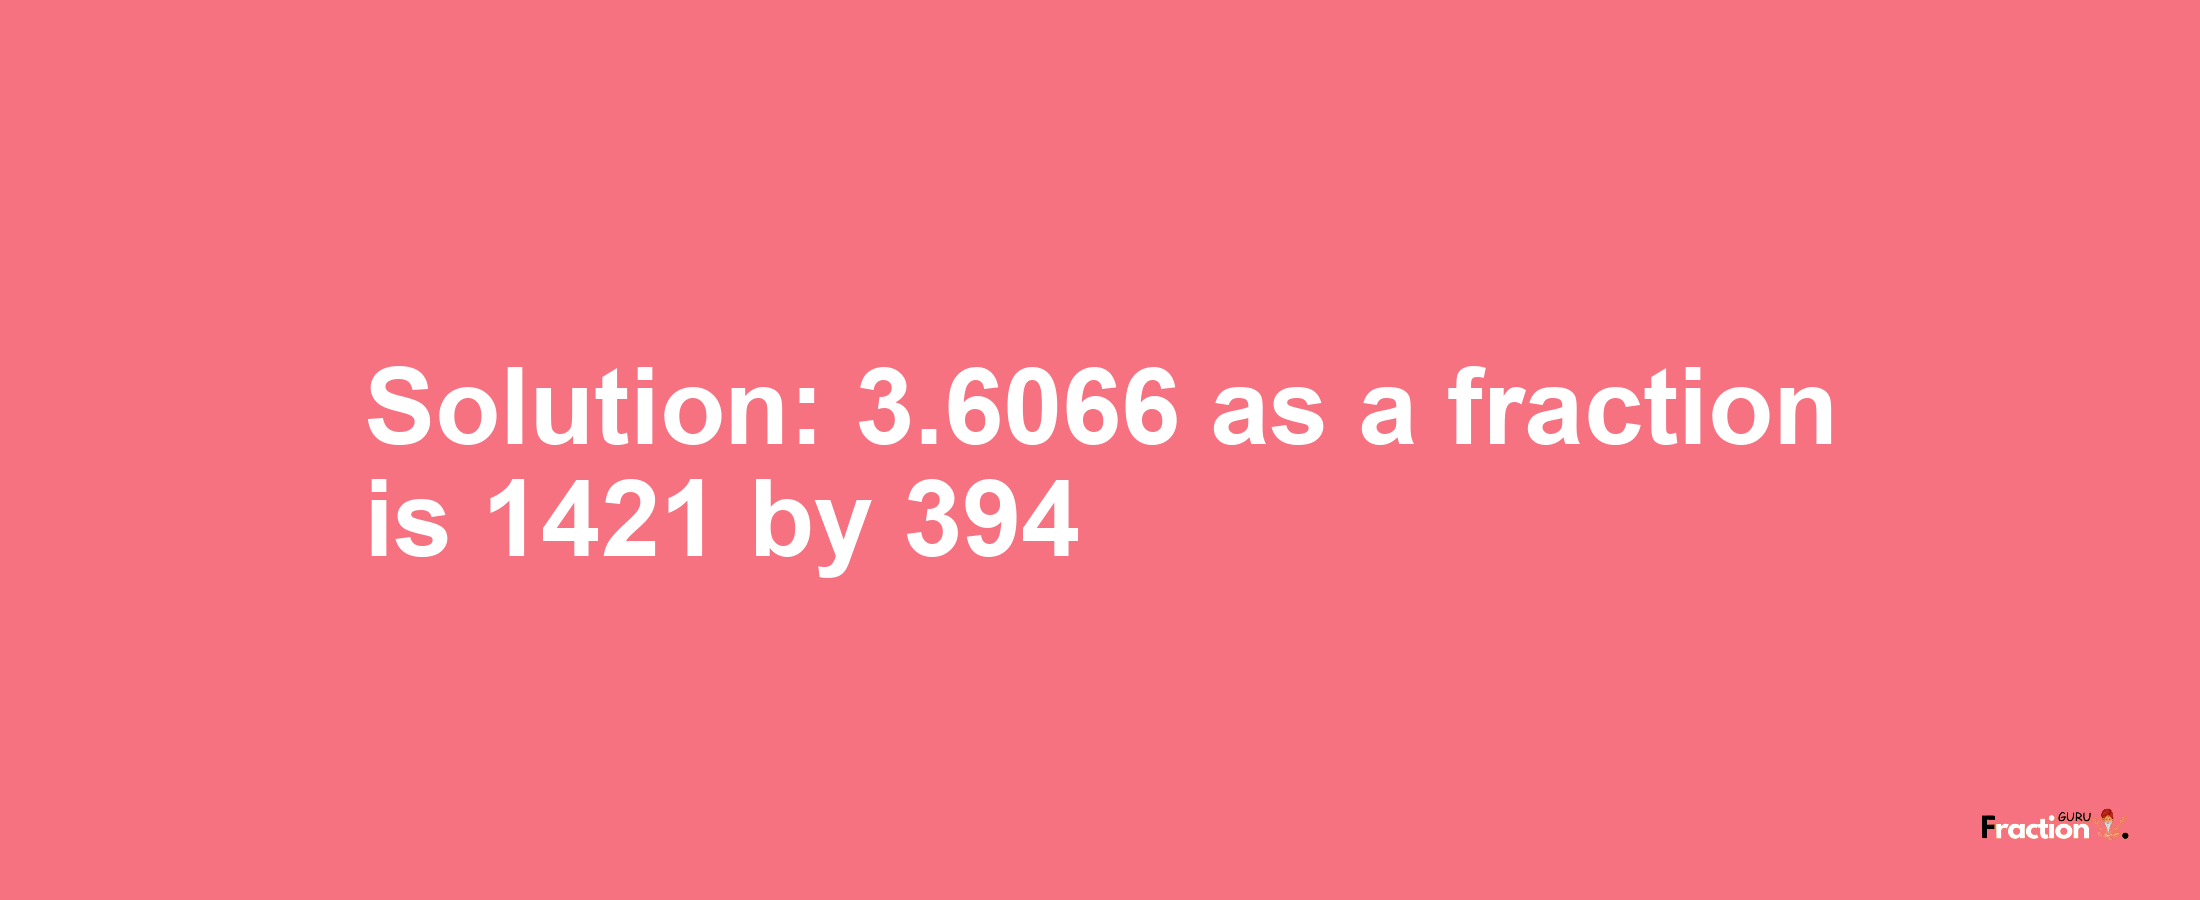 Solution:3.6066 as a fraction is 1421/394